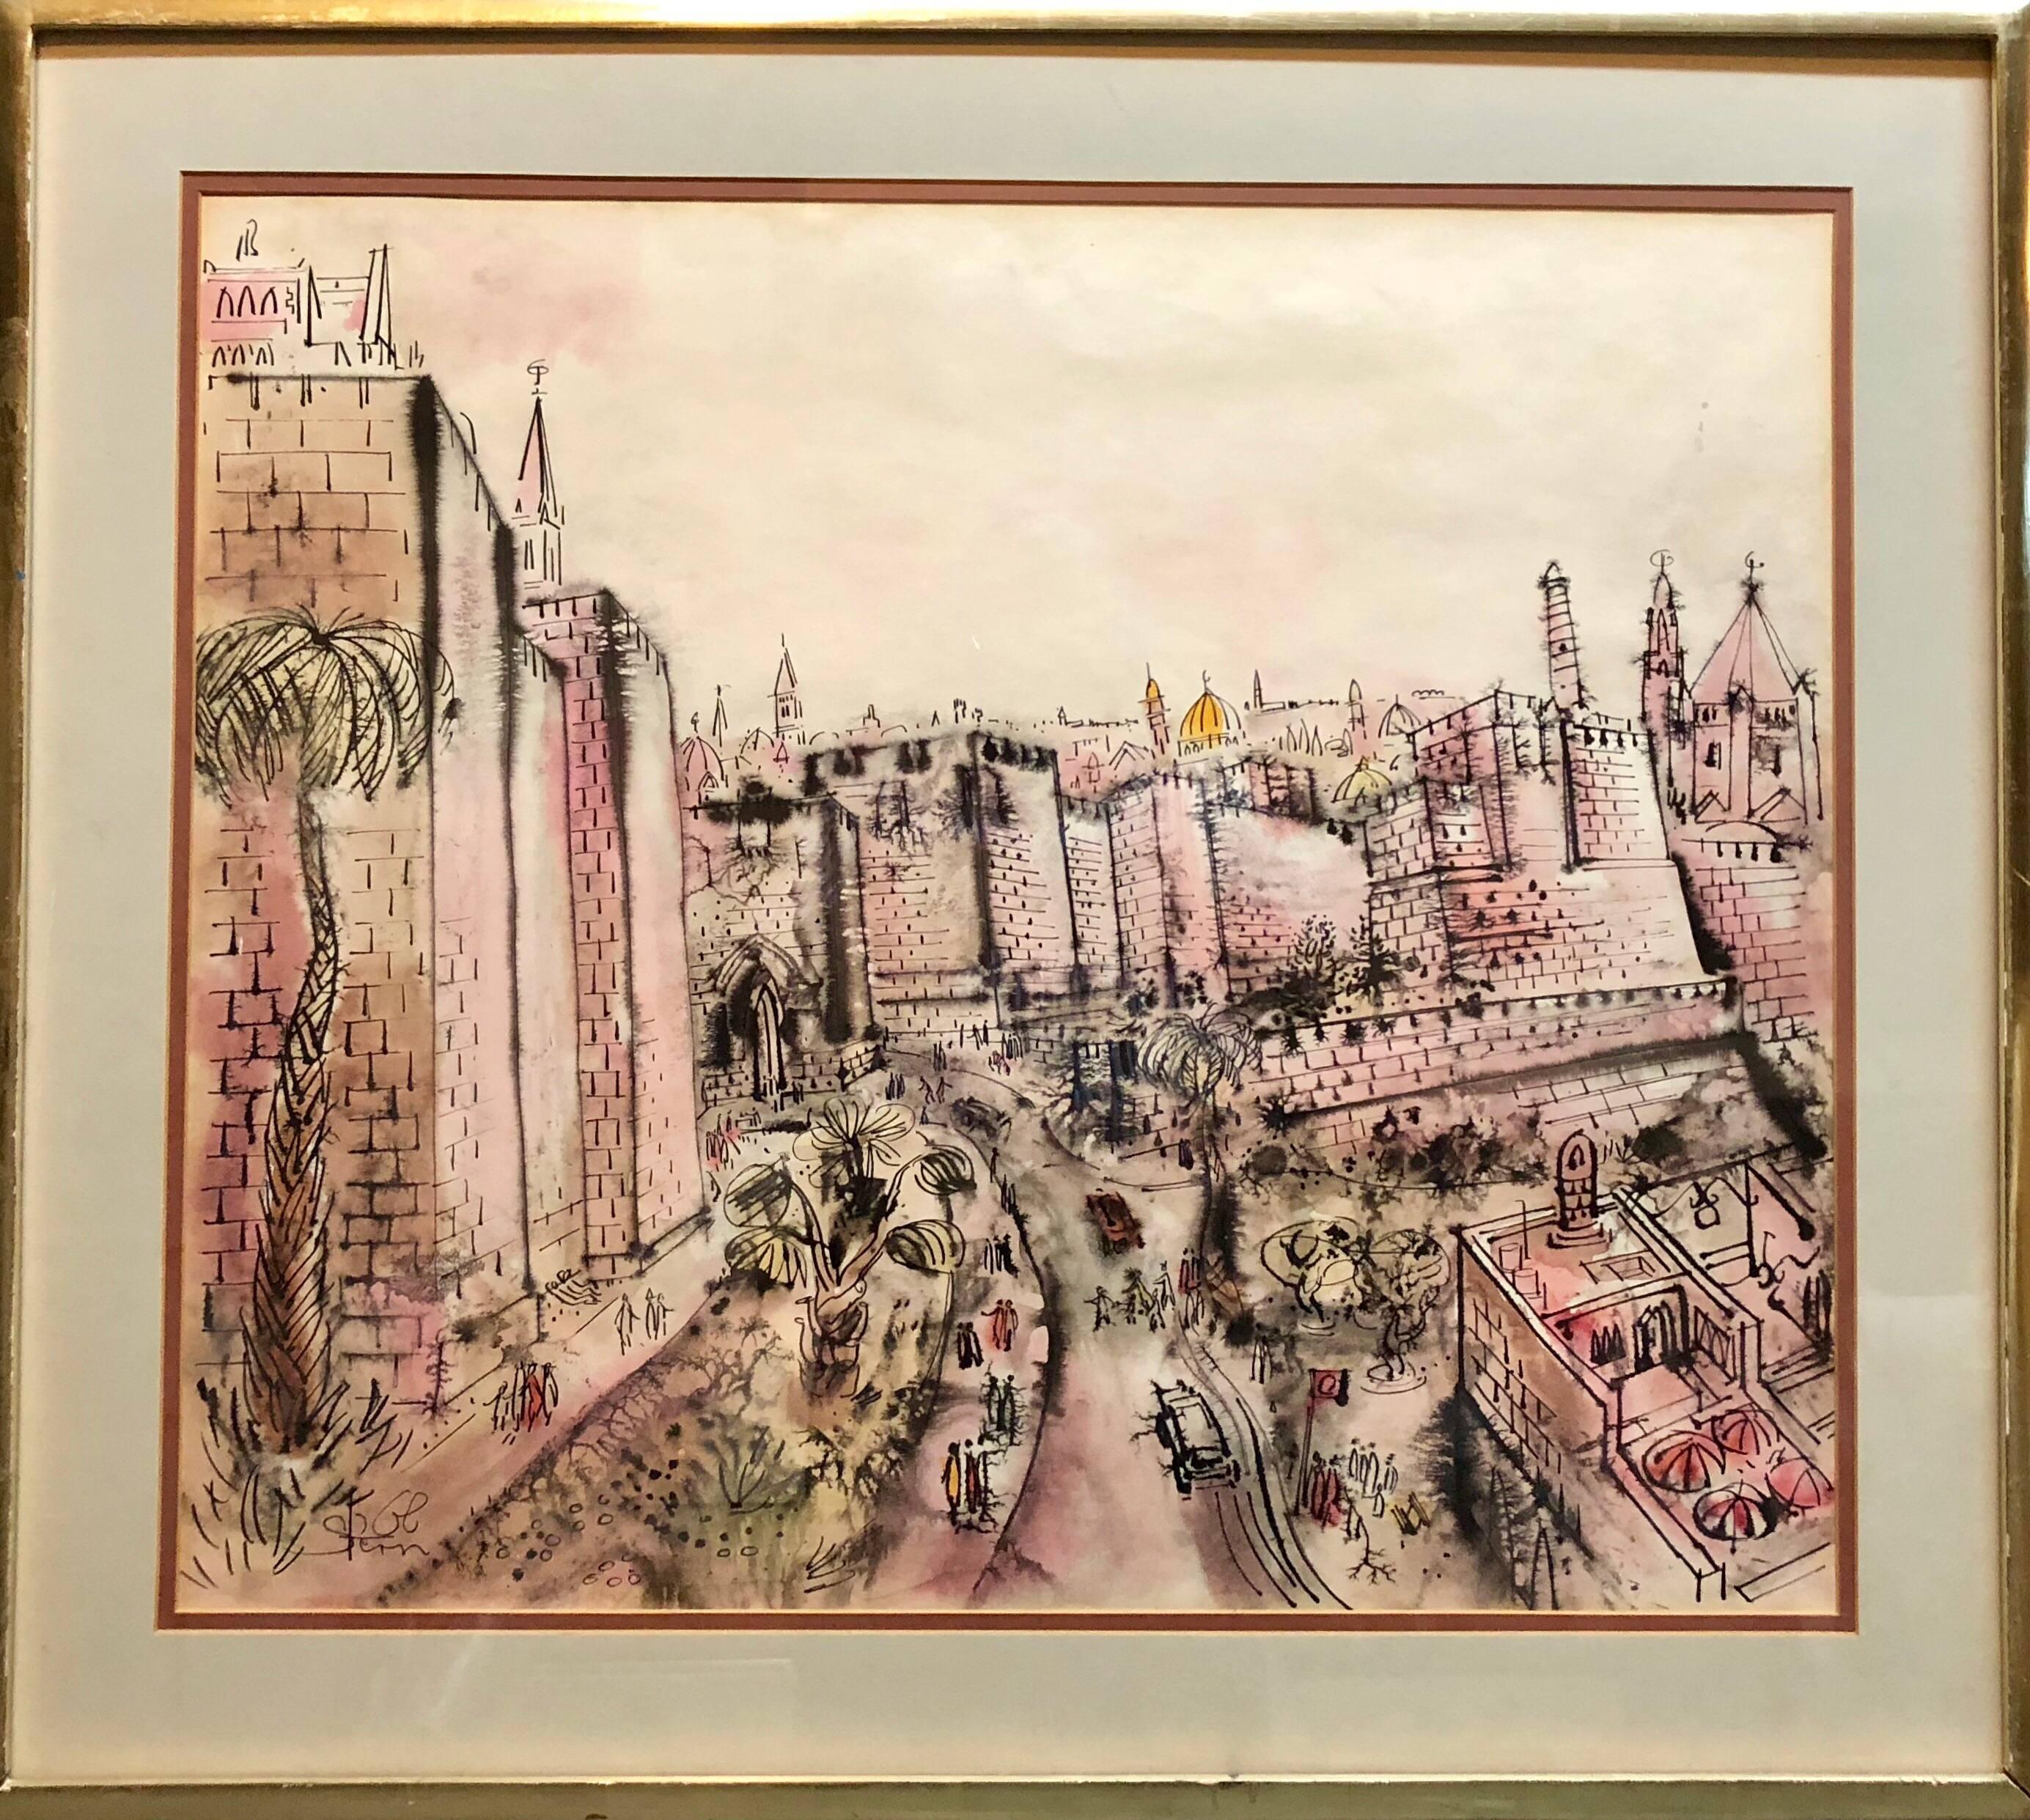  Vibrant Gouache and watercolor painting by Israeli master JOSSI STERN. on paper mounted to board. 31x34.75, 23.5x27.5 without frame.
Hungary, b. 1923, d. 1992
Jossi (Yossi) Stern, son of David and Katerina, was born in the Bakon Hills of Hungary,